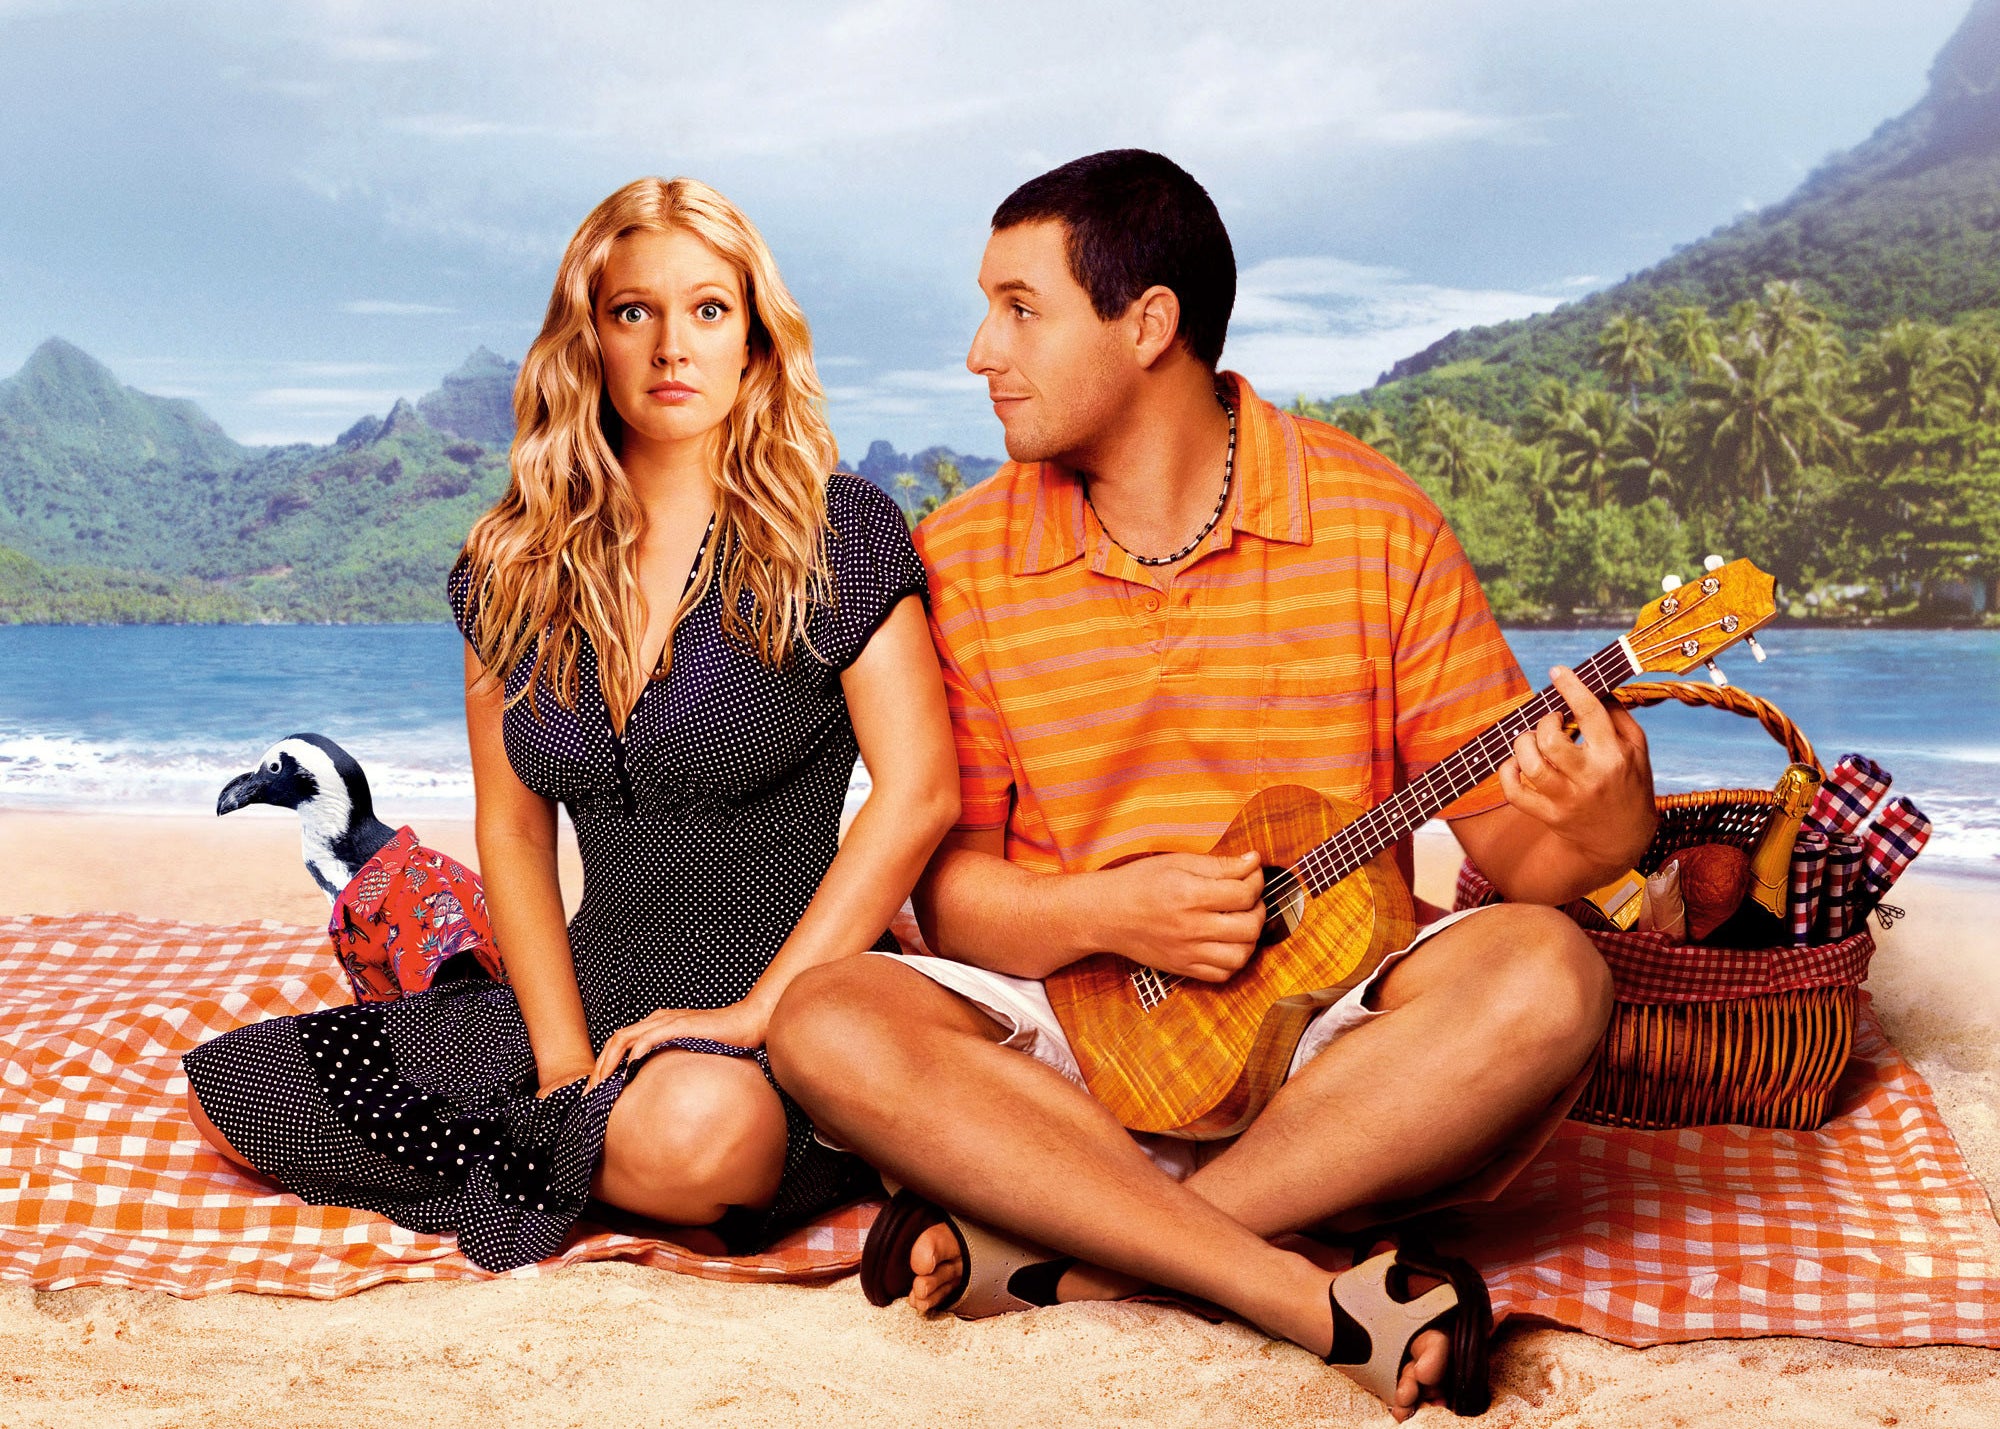 Drew Barrymore and Adam Sandler sit on a blanket on the sand on a beach